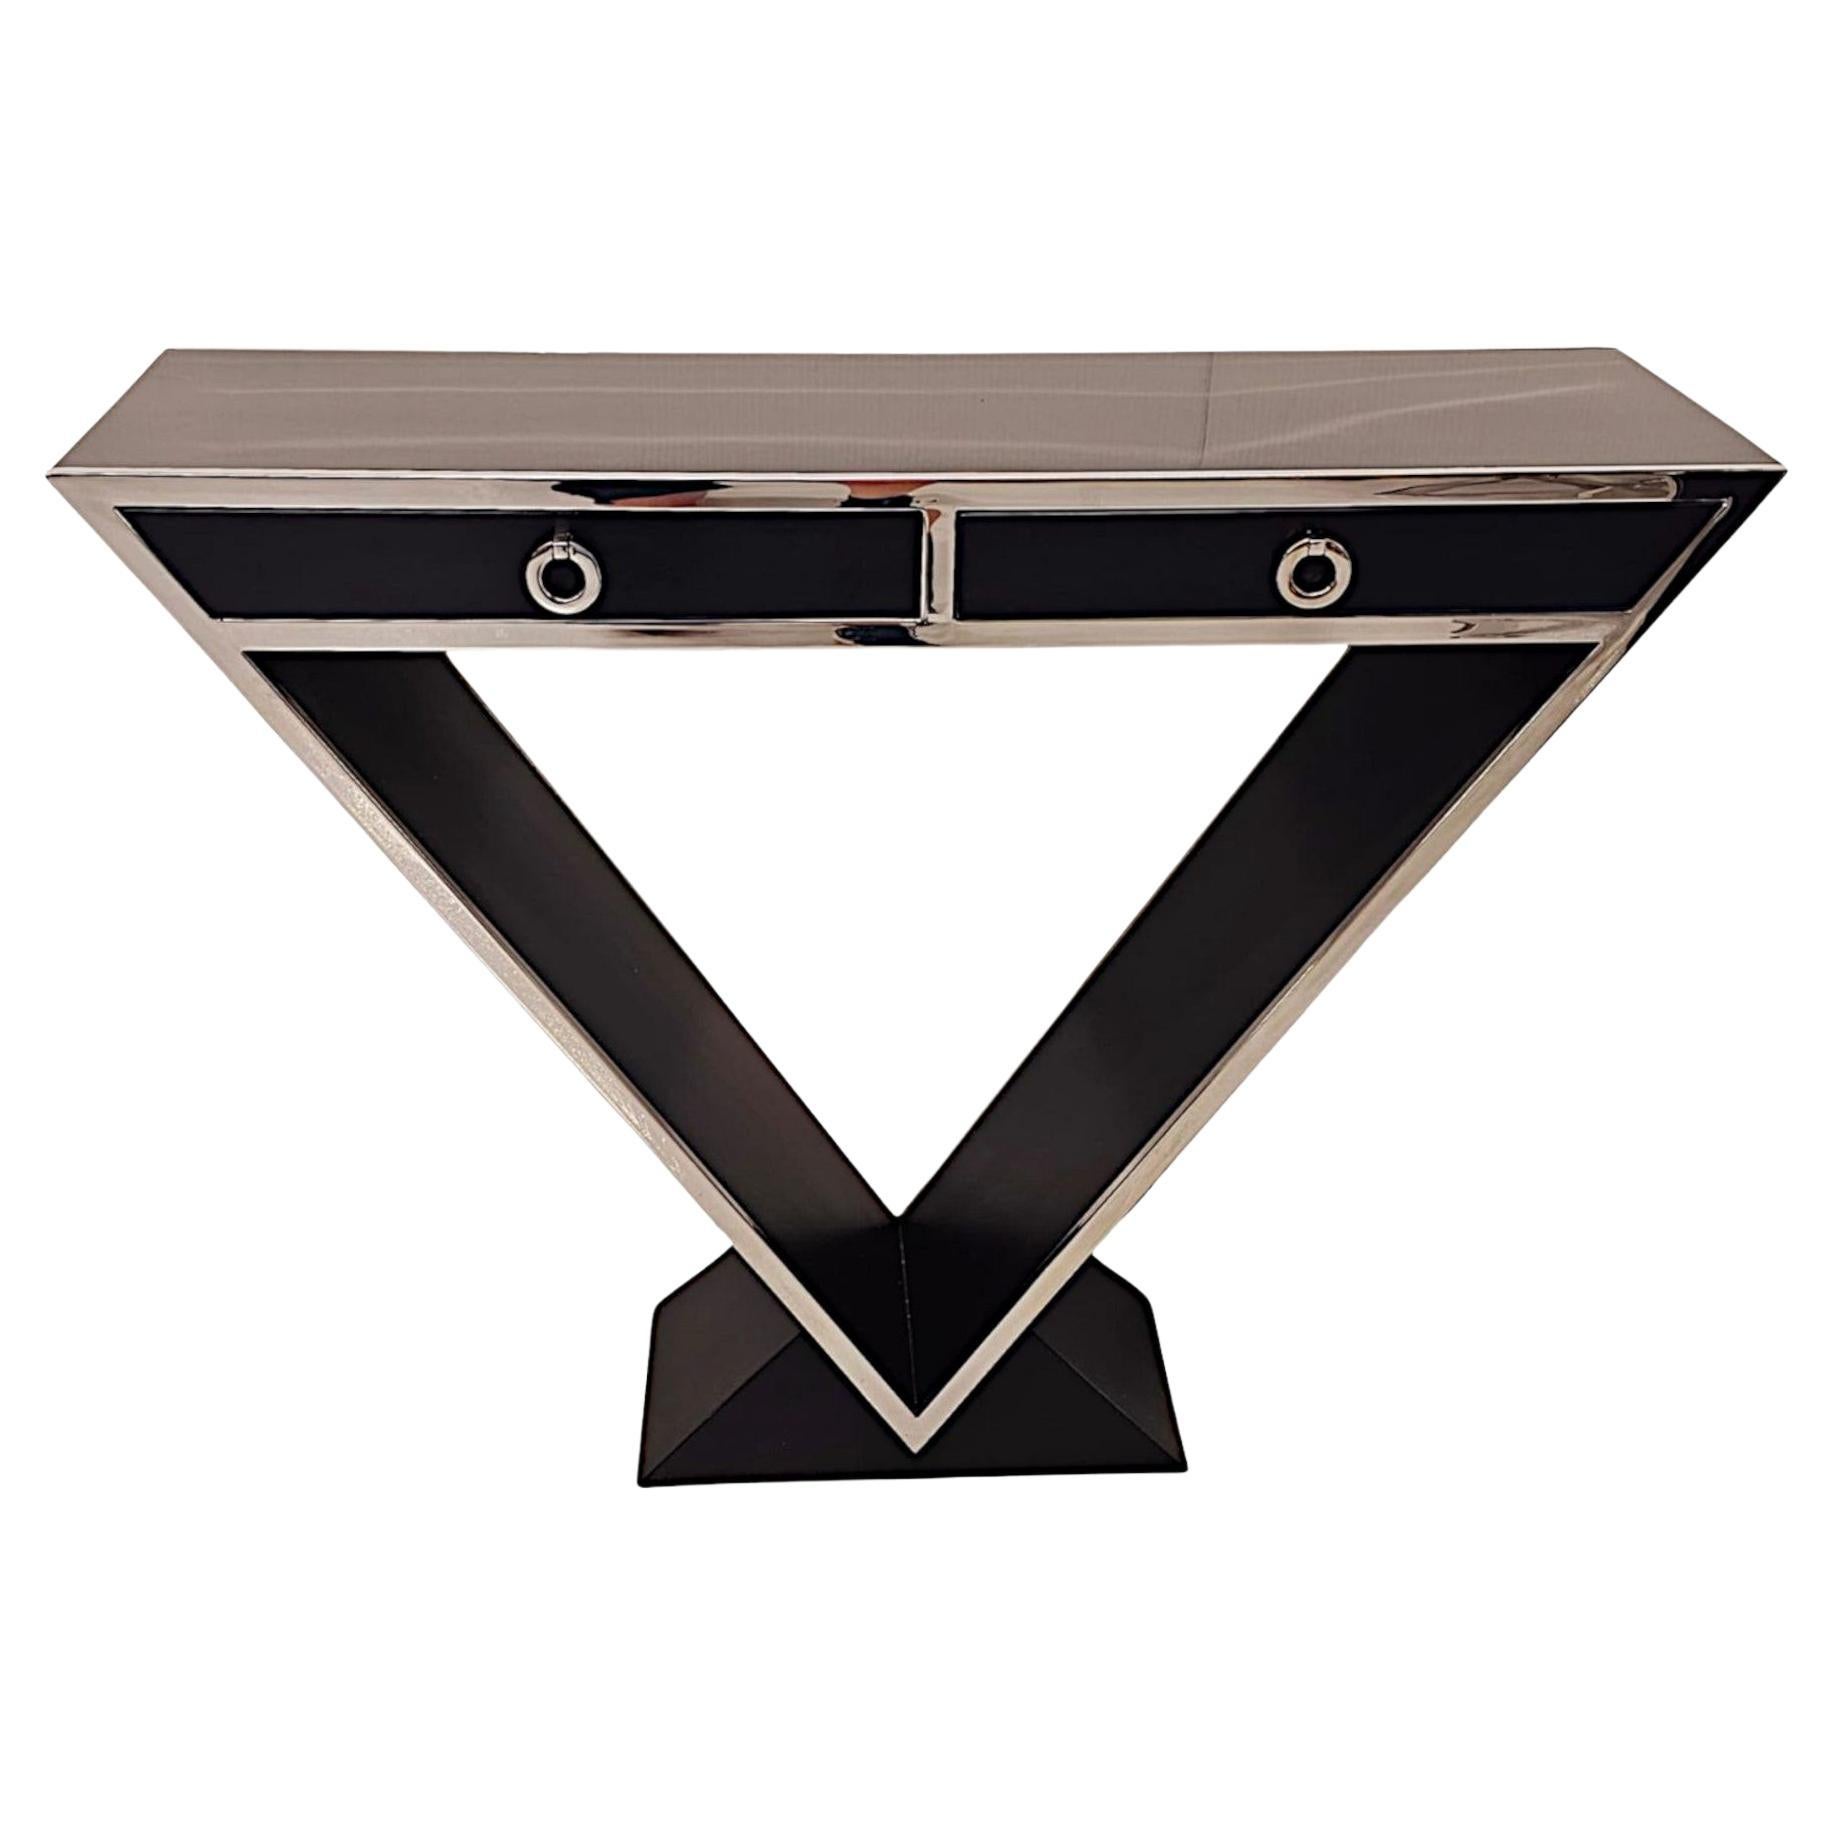  A Stunning Art Deco Style Black Laquered Timber and Chrome Console Table